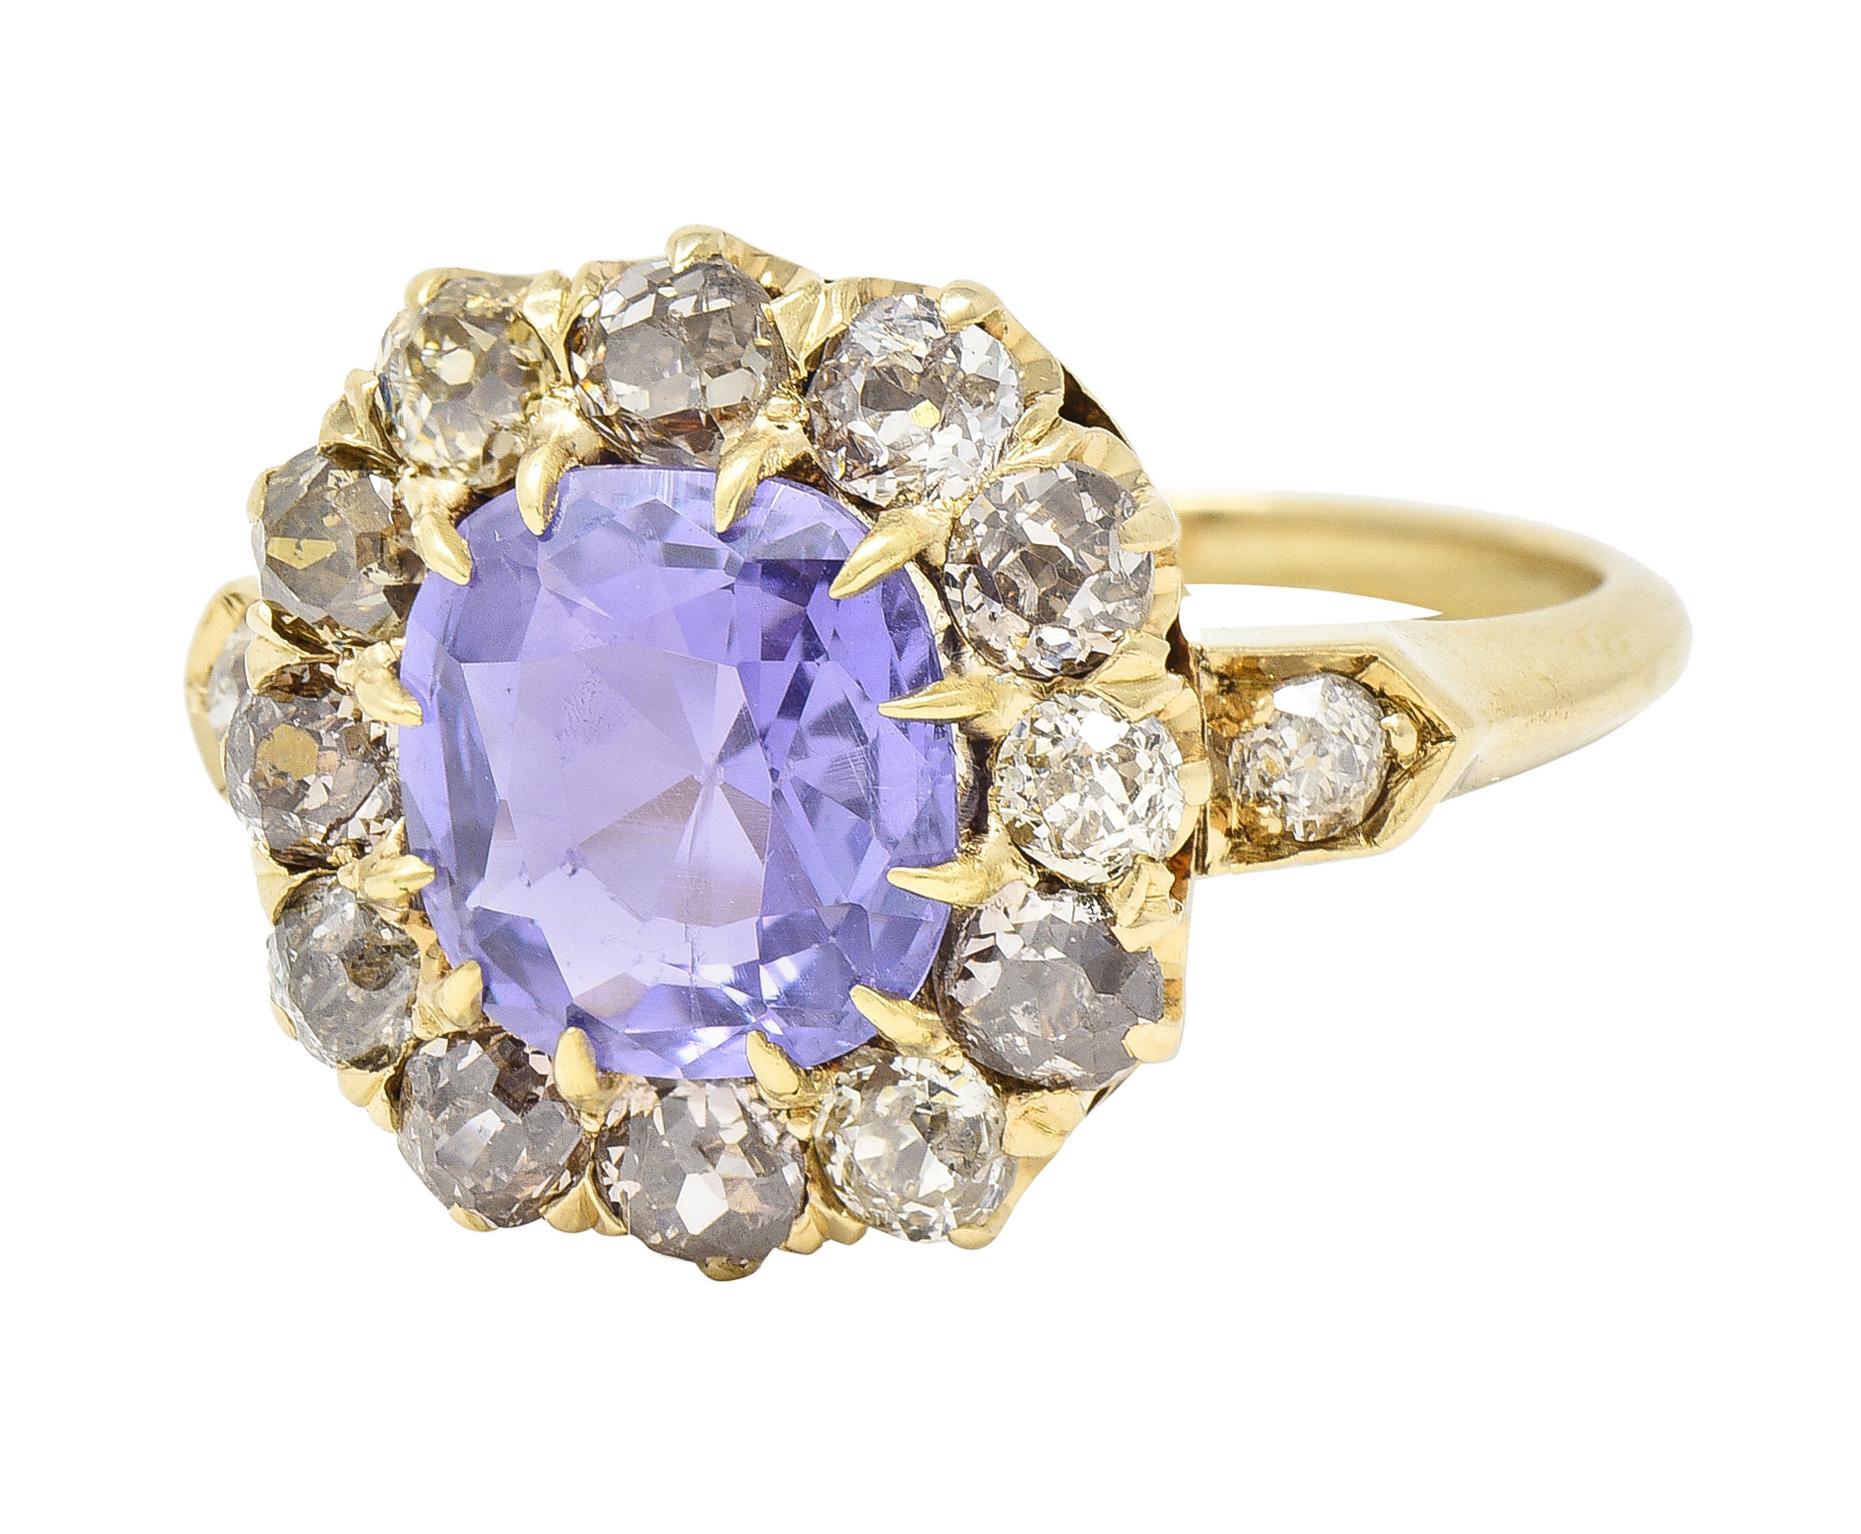 Centering a cushion cut sapphire weighing 2.24 carats - transparent light purple in color
Natural Ceylon in origin with no indications of heat treatment 
Prong set with a halo surround of old mine cut diamonds
With additional diamonds bead set in